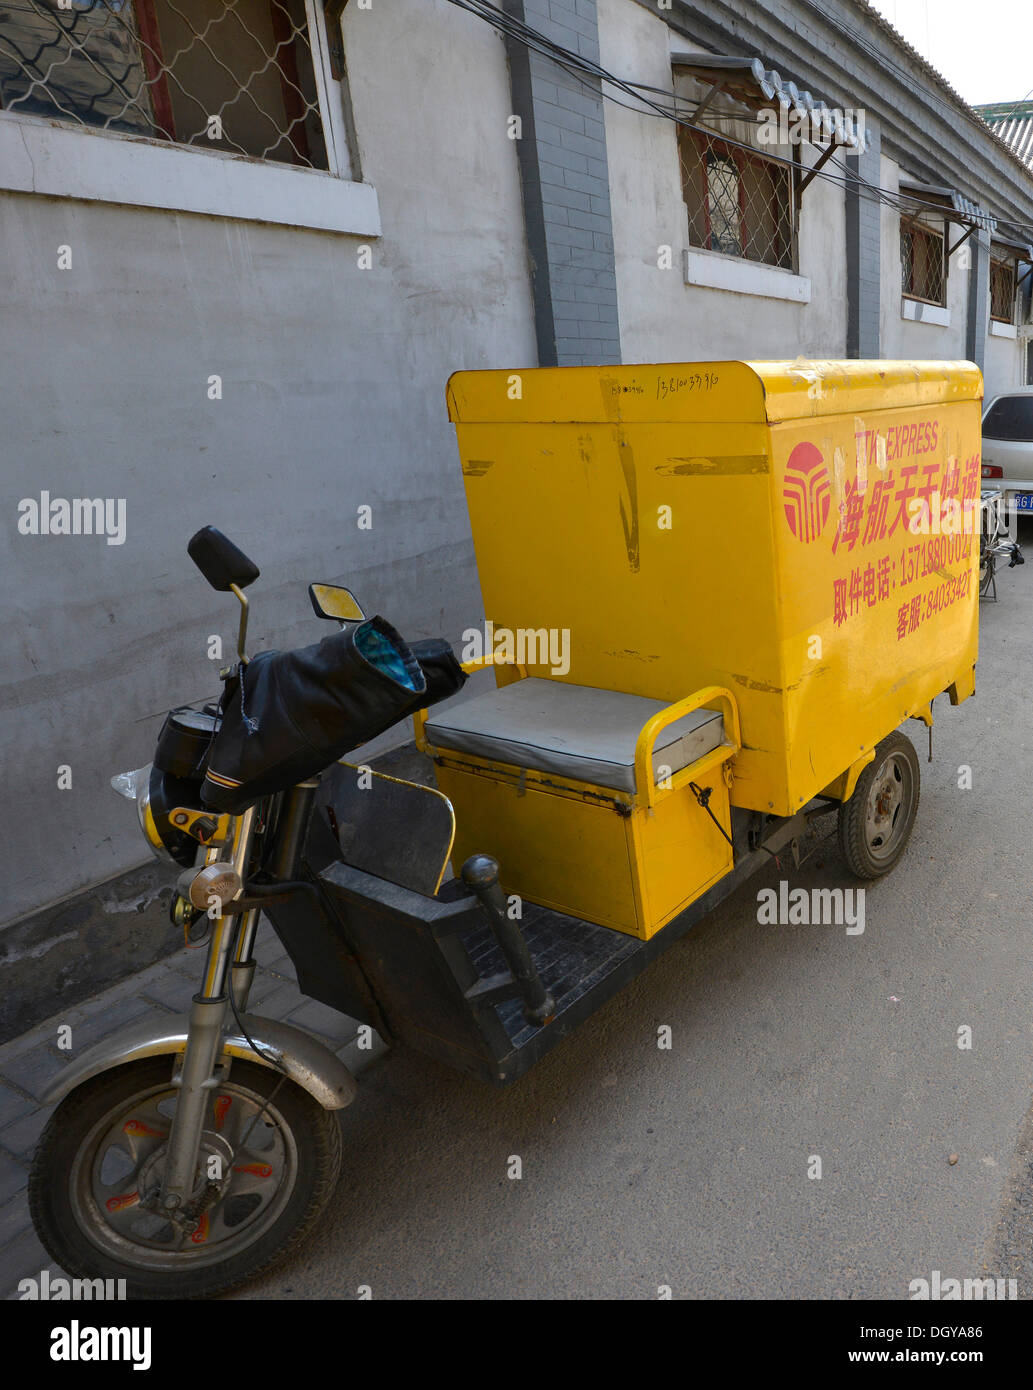 Post Express motorised rickshaw in an old traditional hutong, a traditional residential courtyard, in Beijing, China, Asia Stock Photo